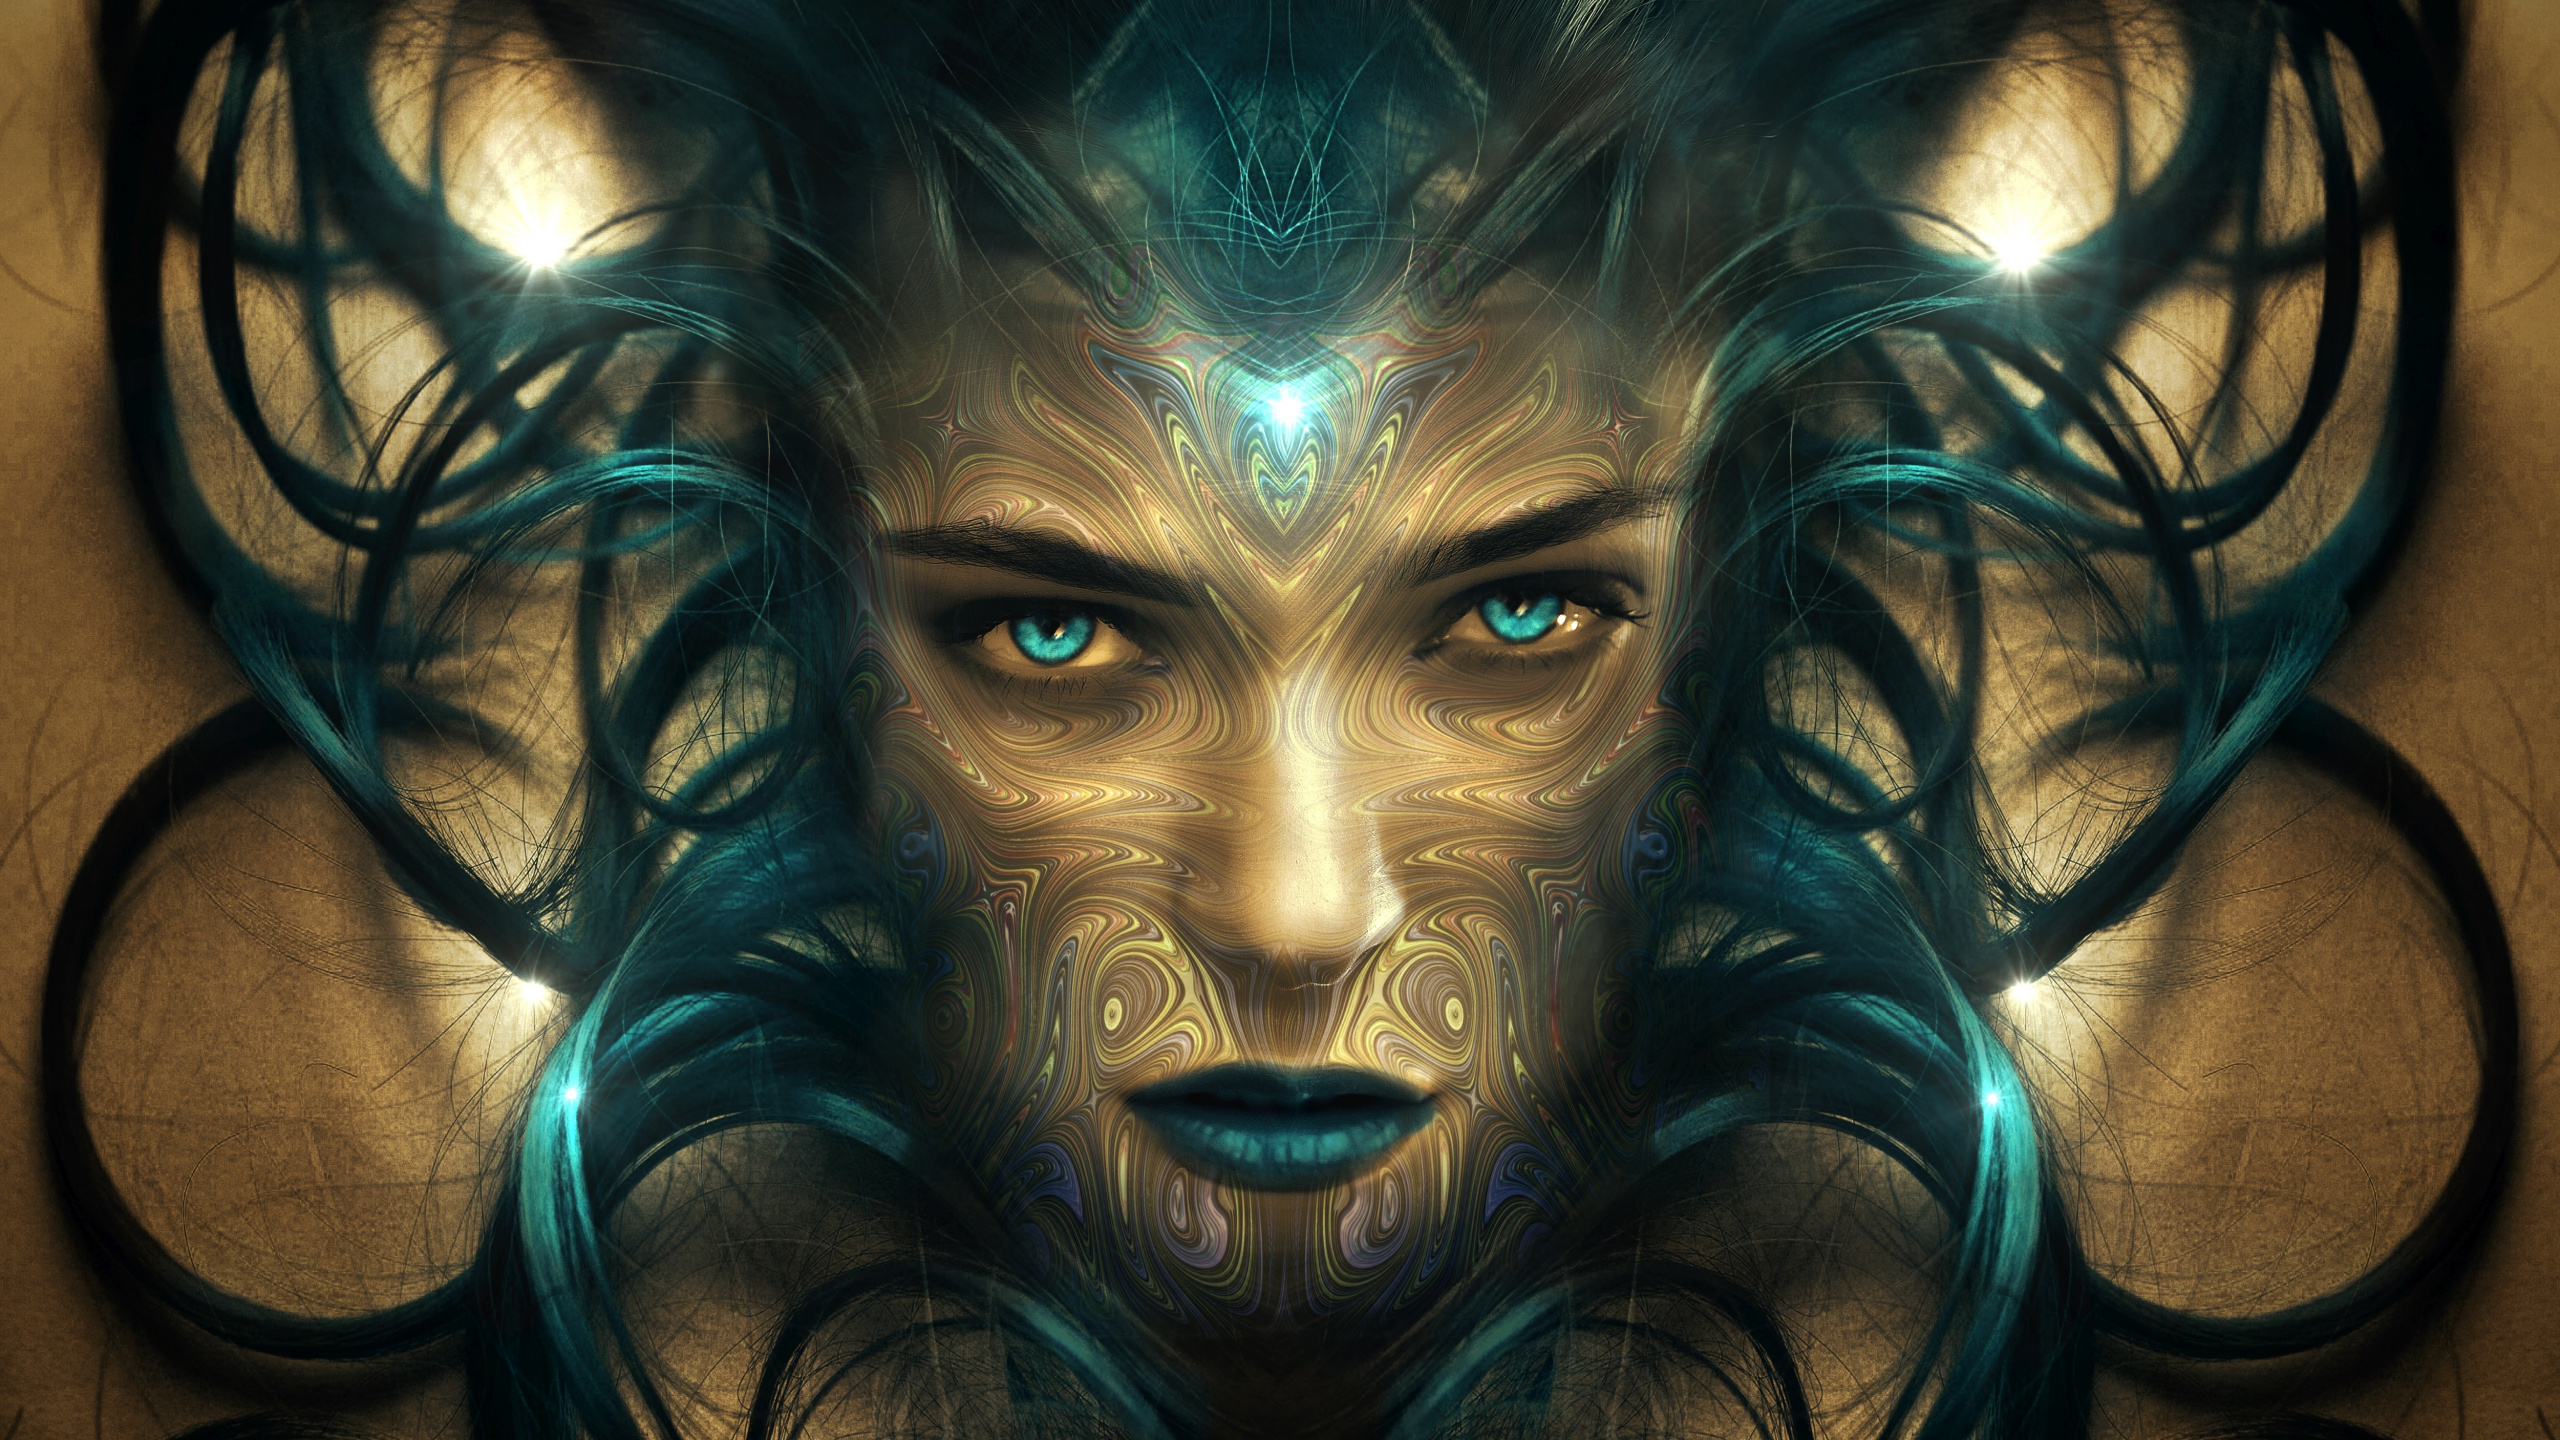 Blue and Black Human Face Painting. Wallpaper in 2560x1440 Resolution